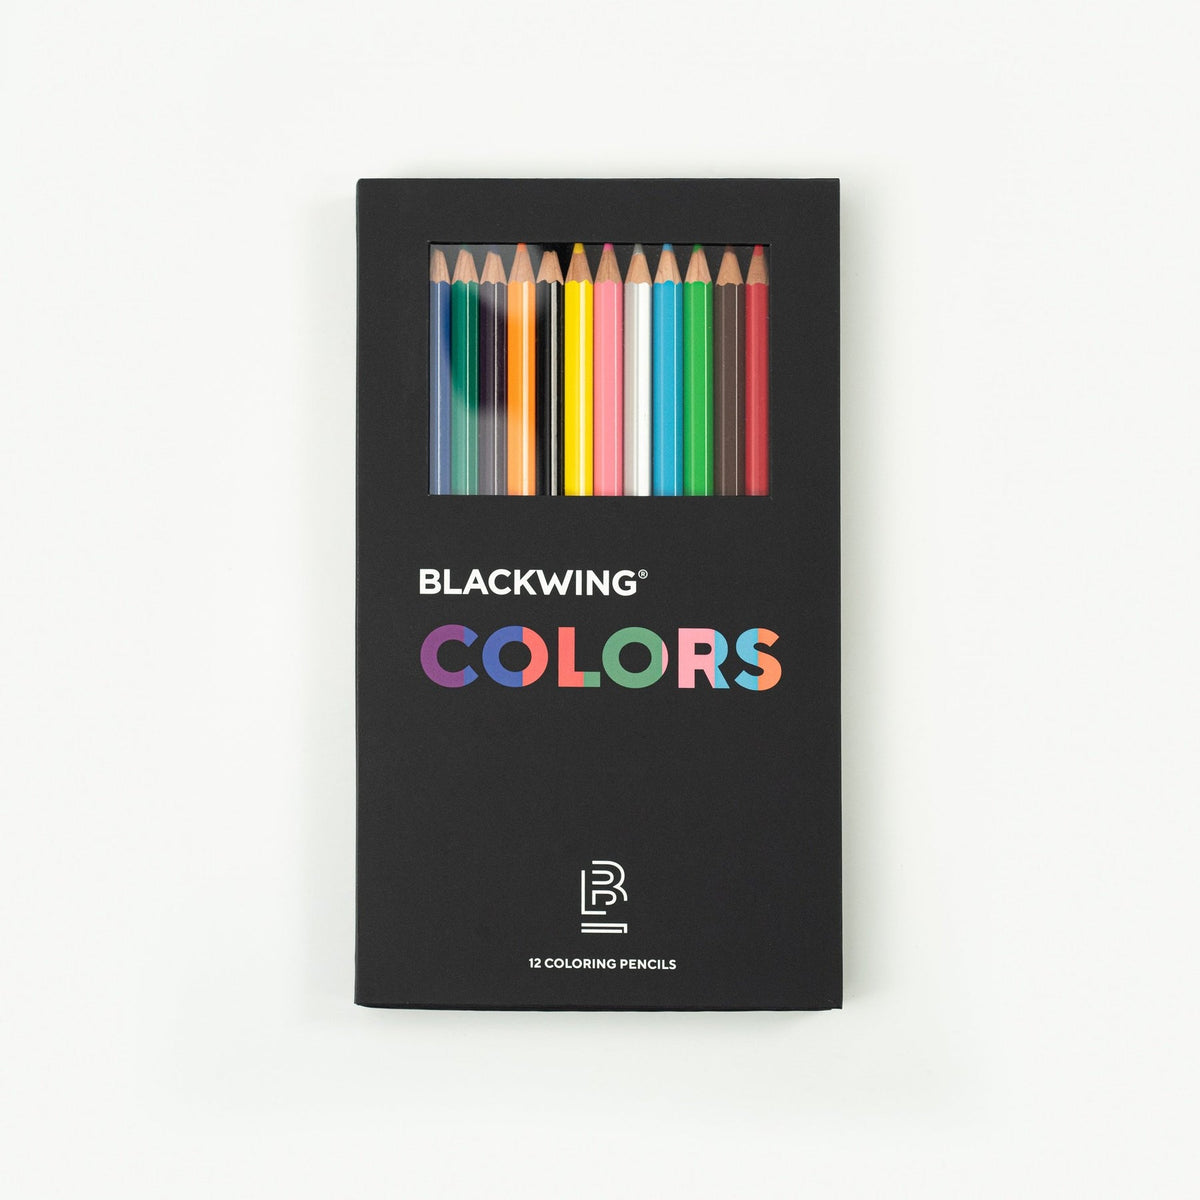 Box of 12 High Quality Colored Pencils from Blackwing